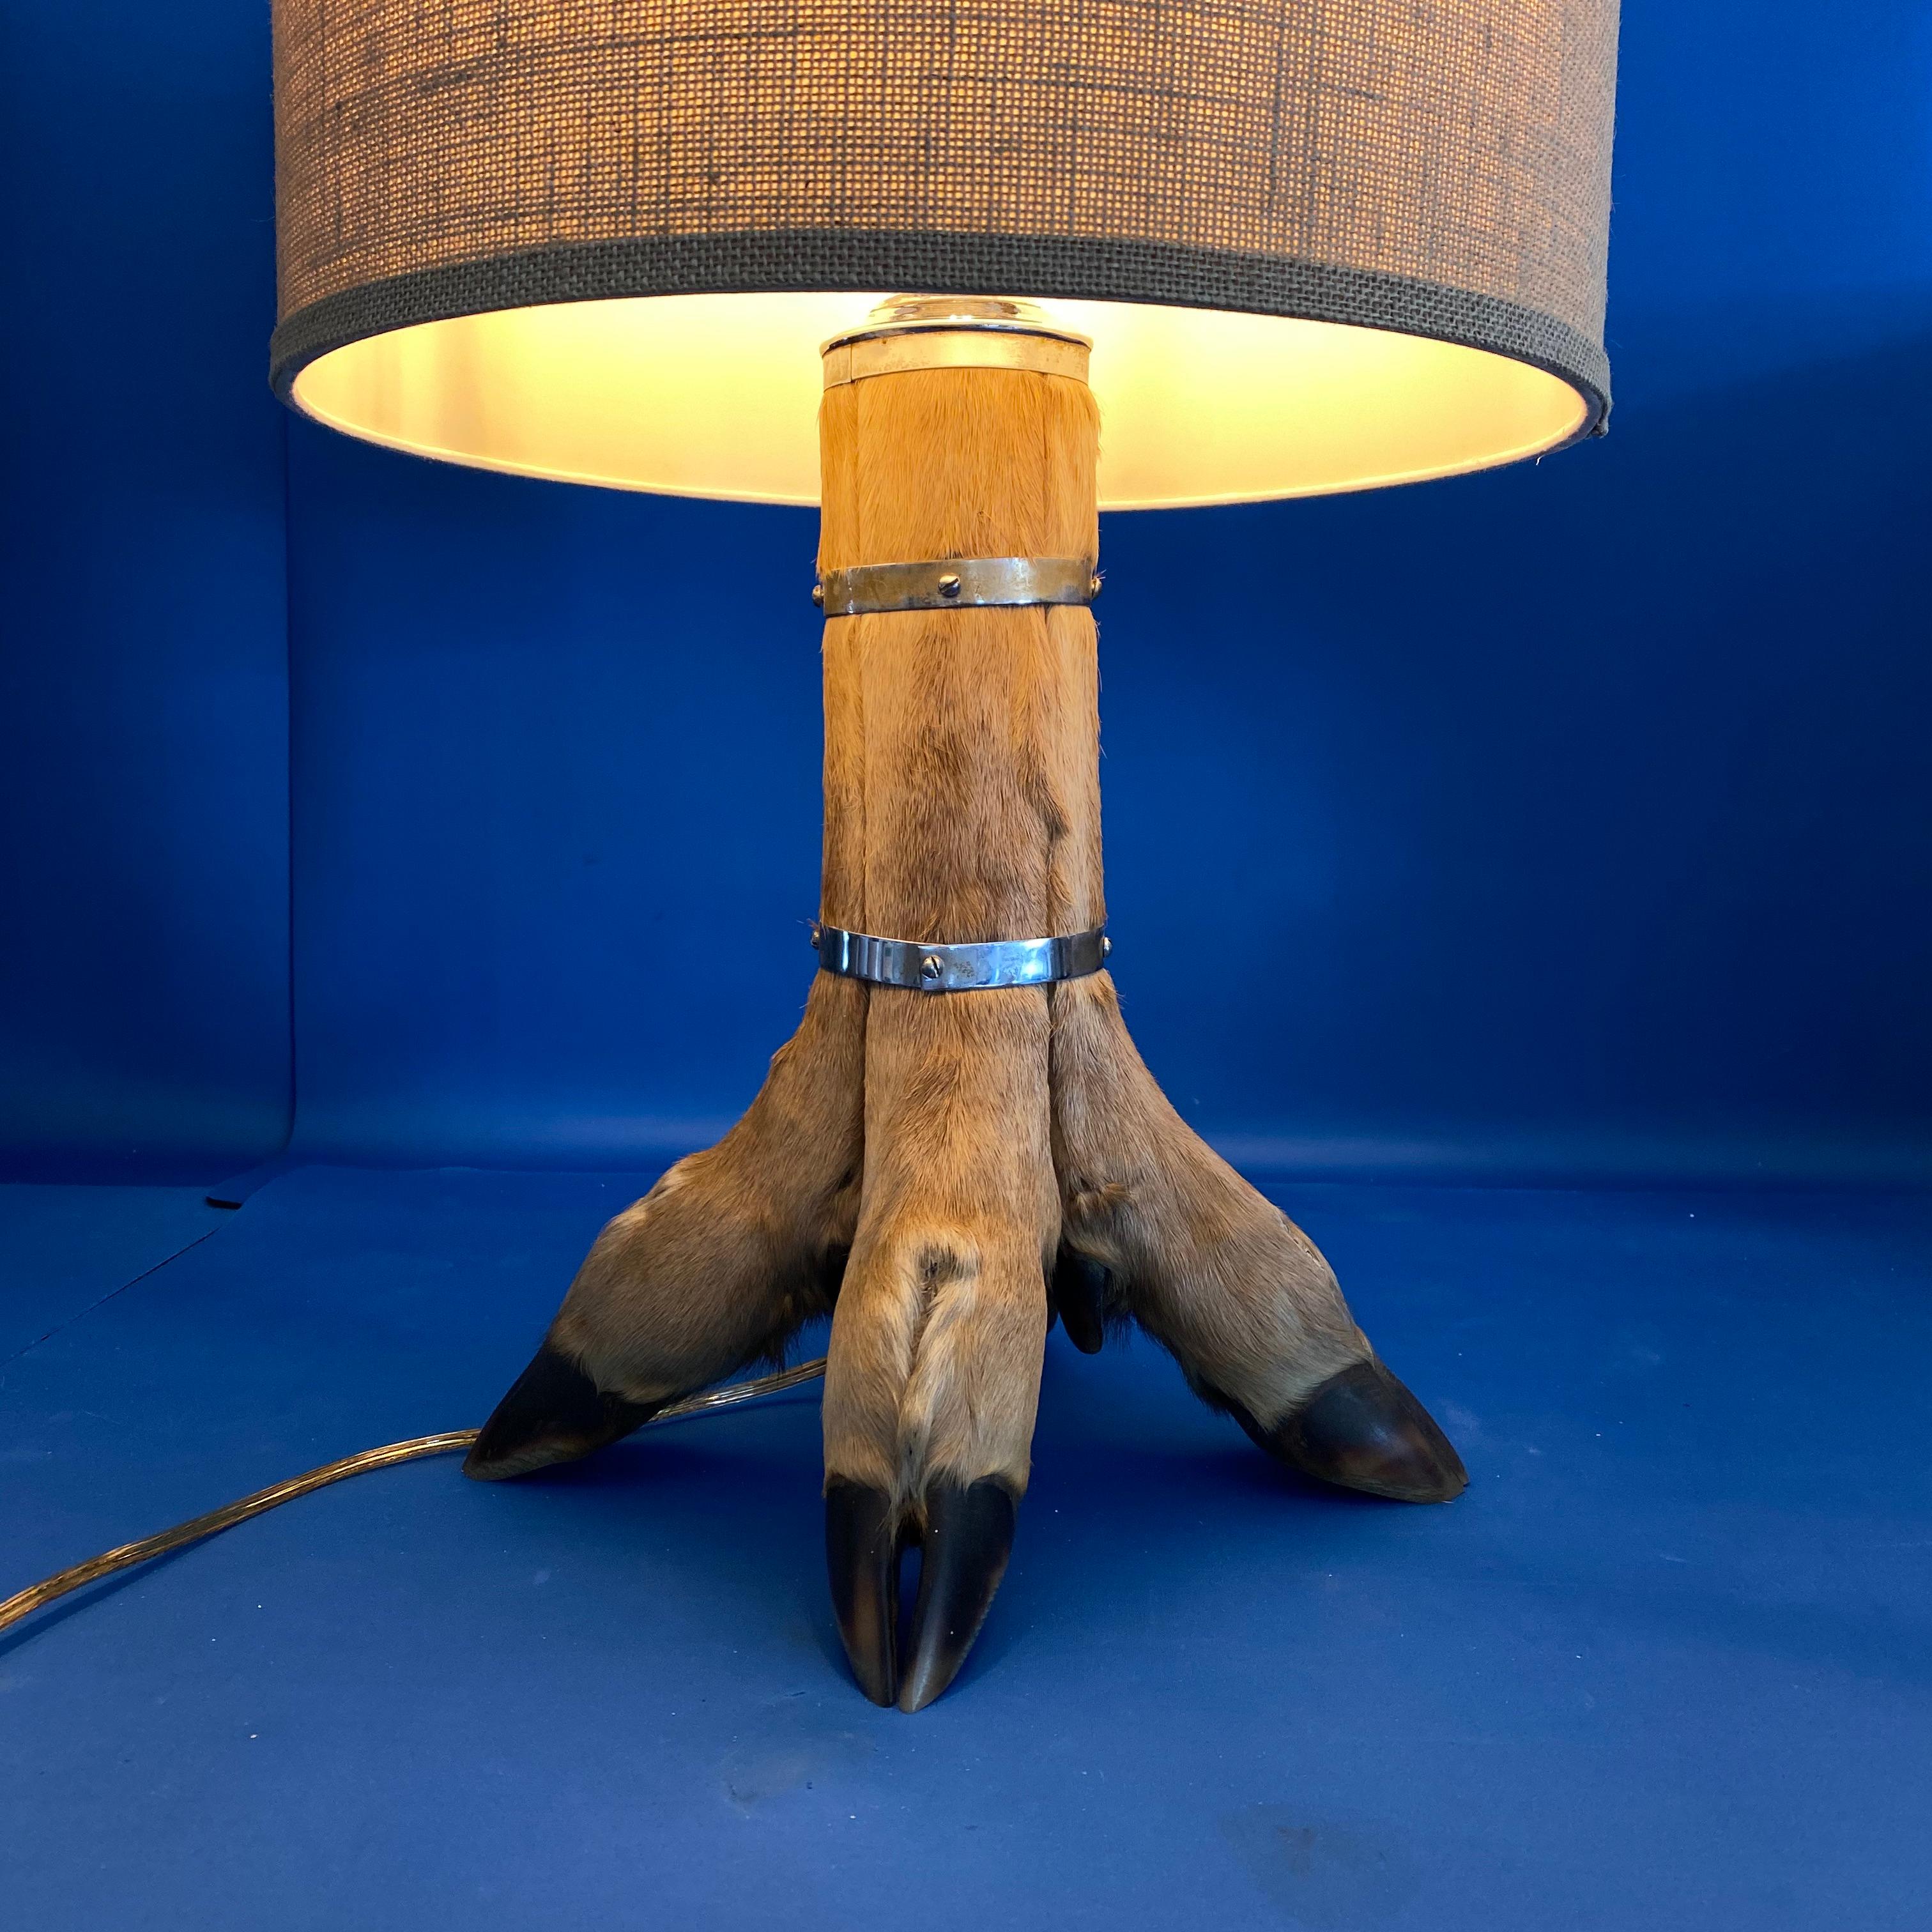 Organic Material Table Lamp With 4 Tier Deer Hoof With Nickel Bands And Antler Finial For Sale